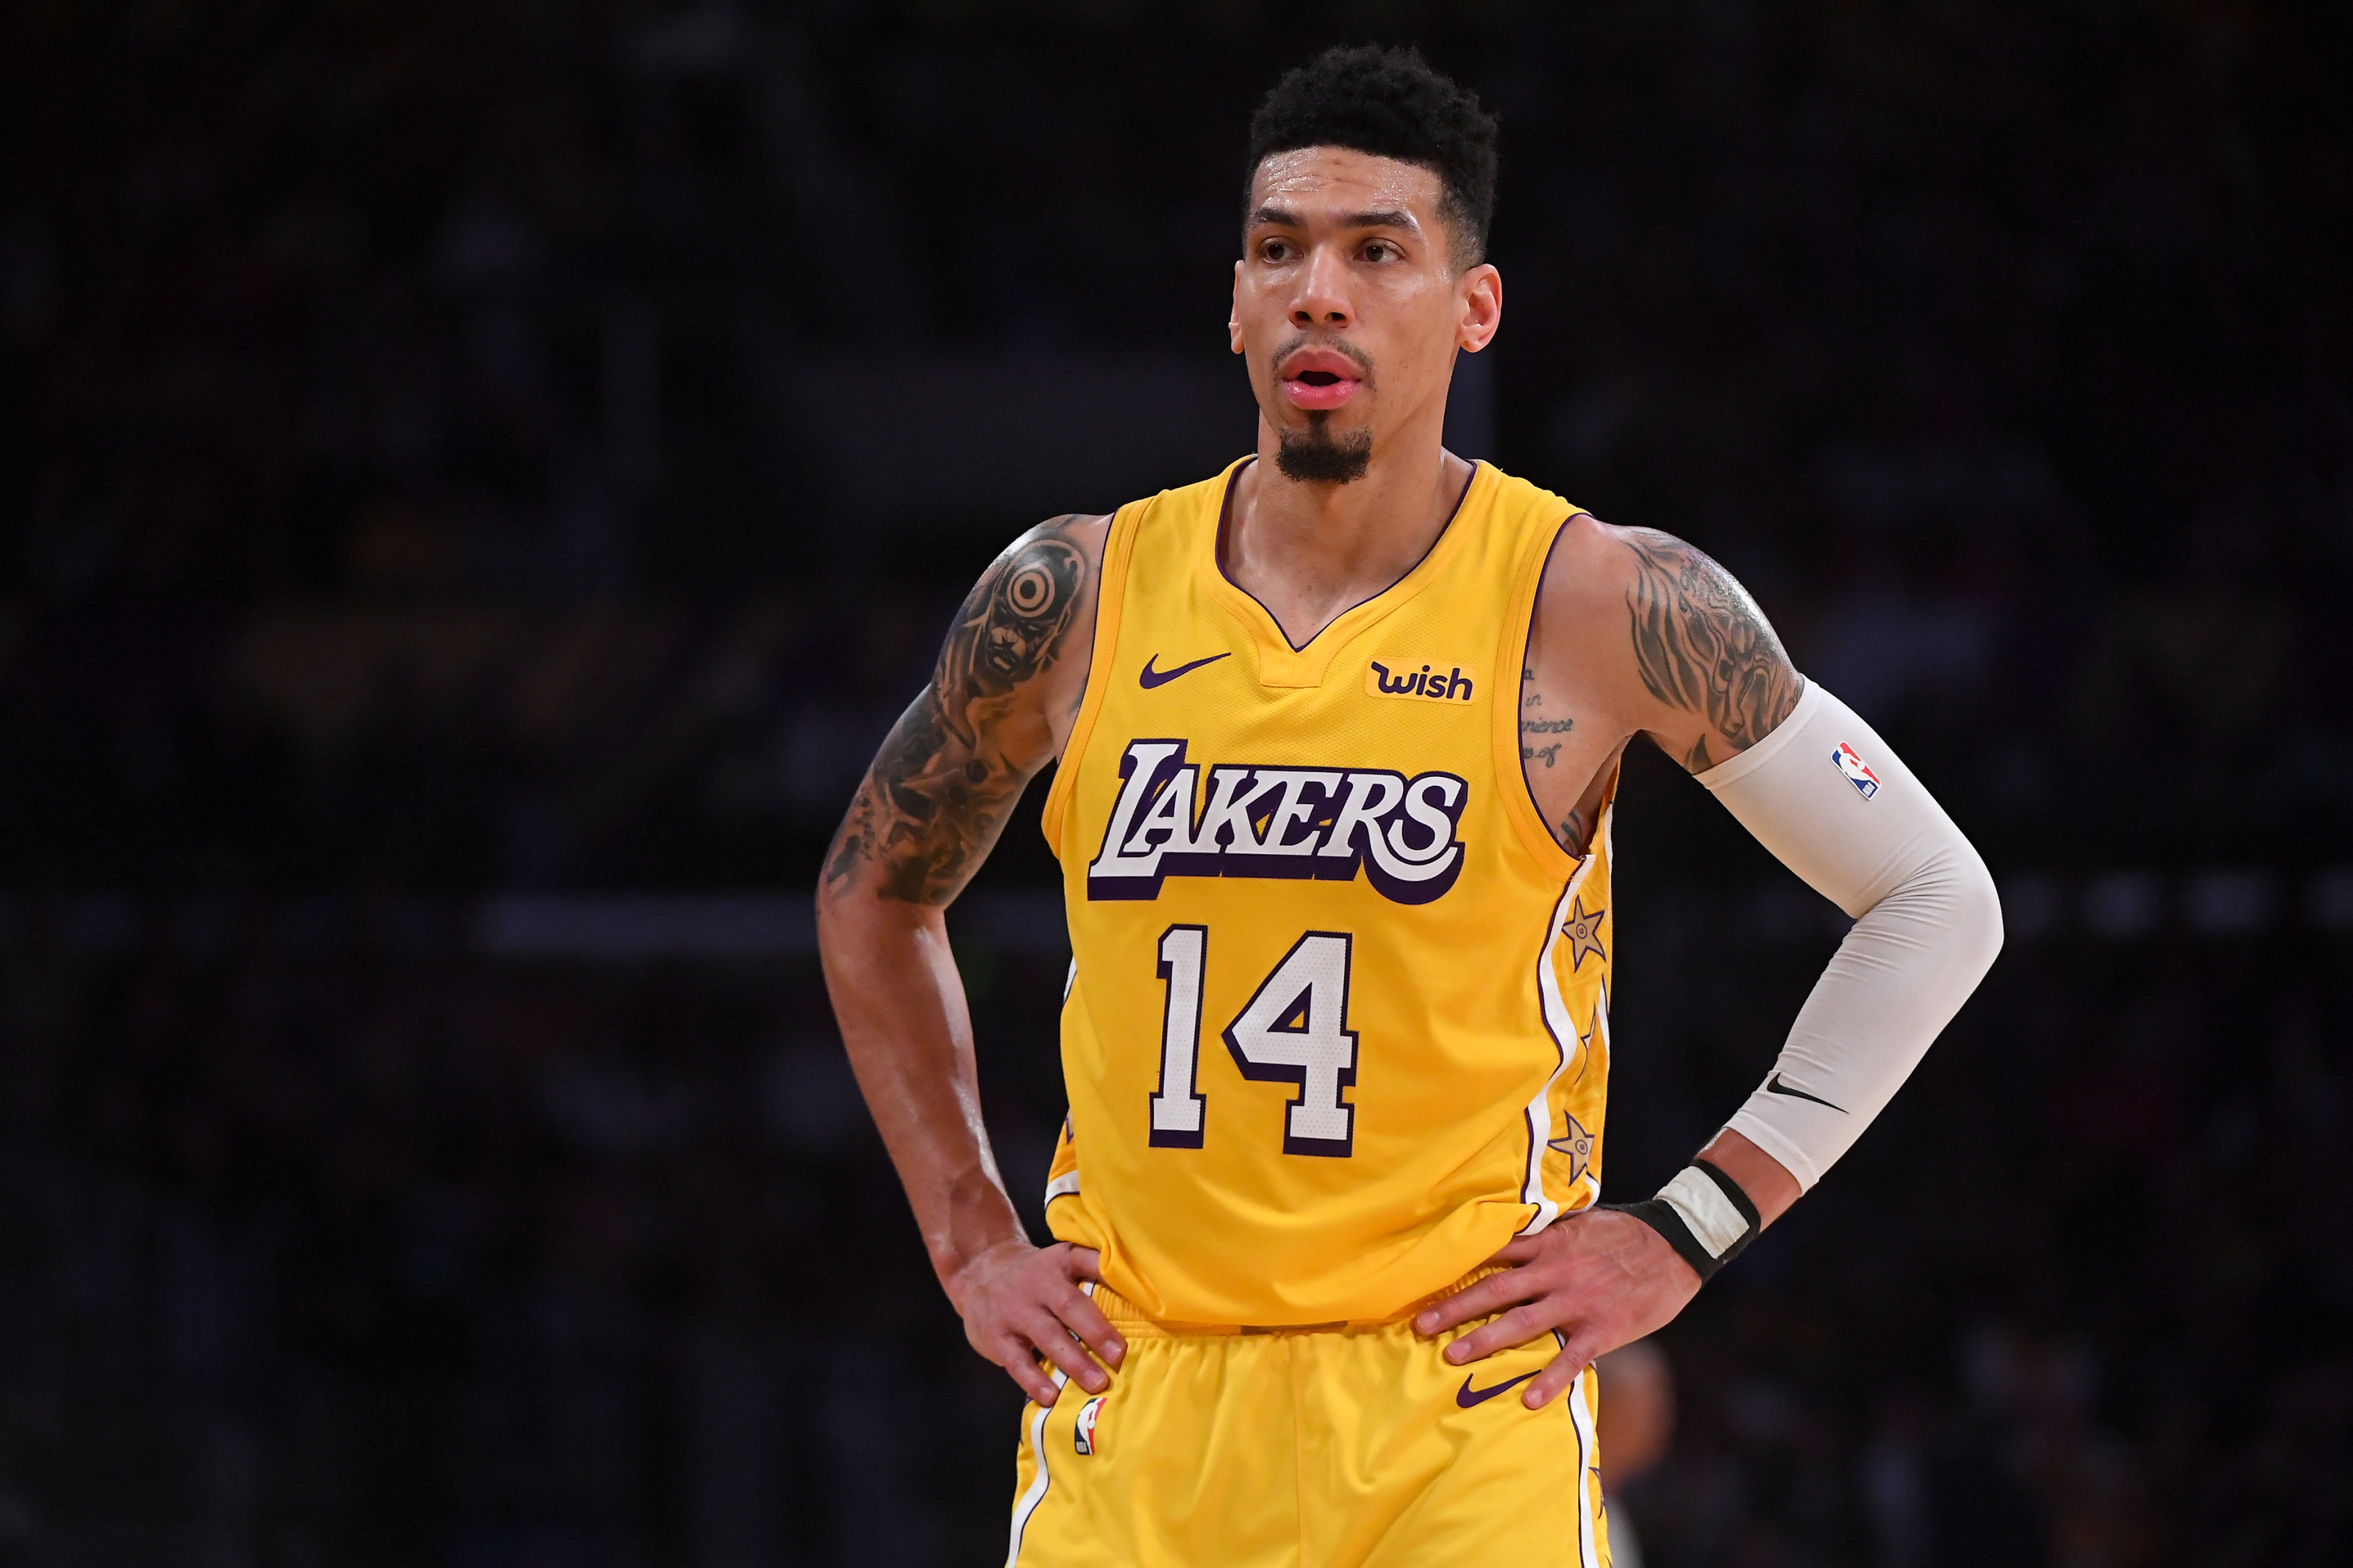 UNC Basketball: Danny Green's big game helps fuel Lakers to win